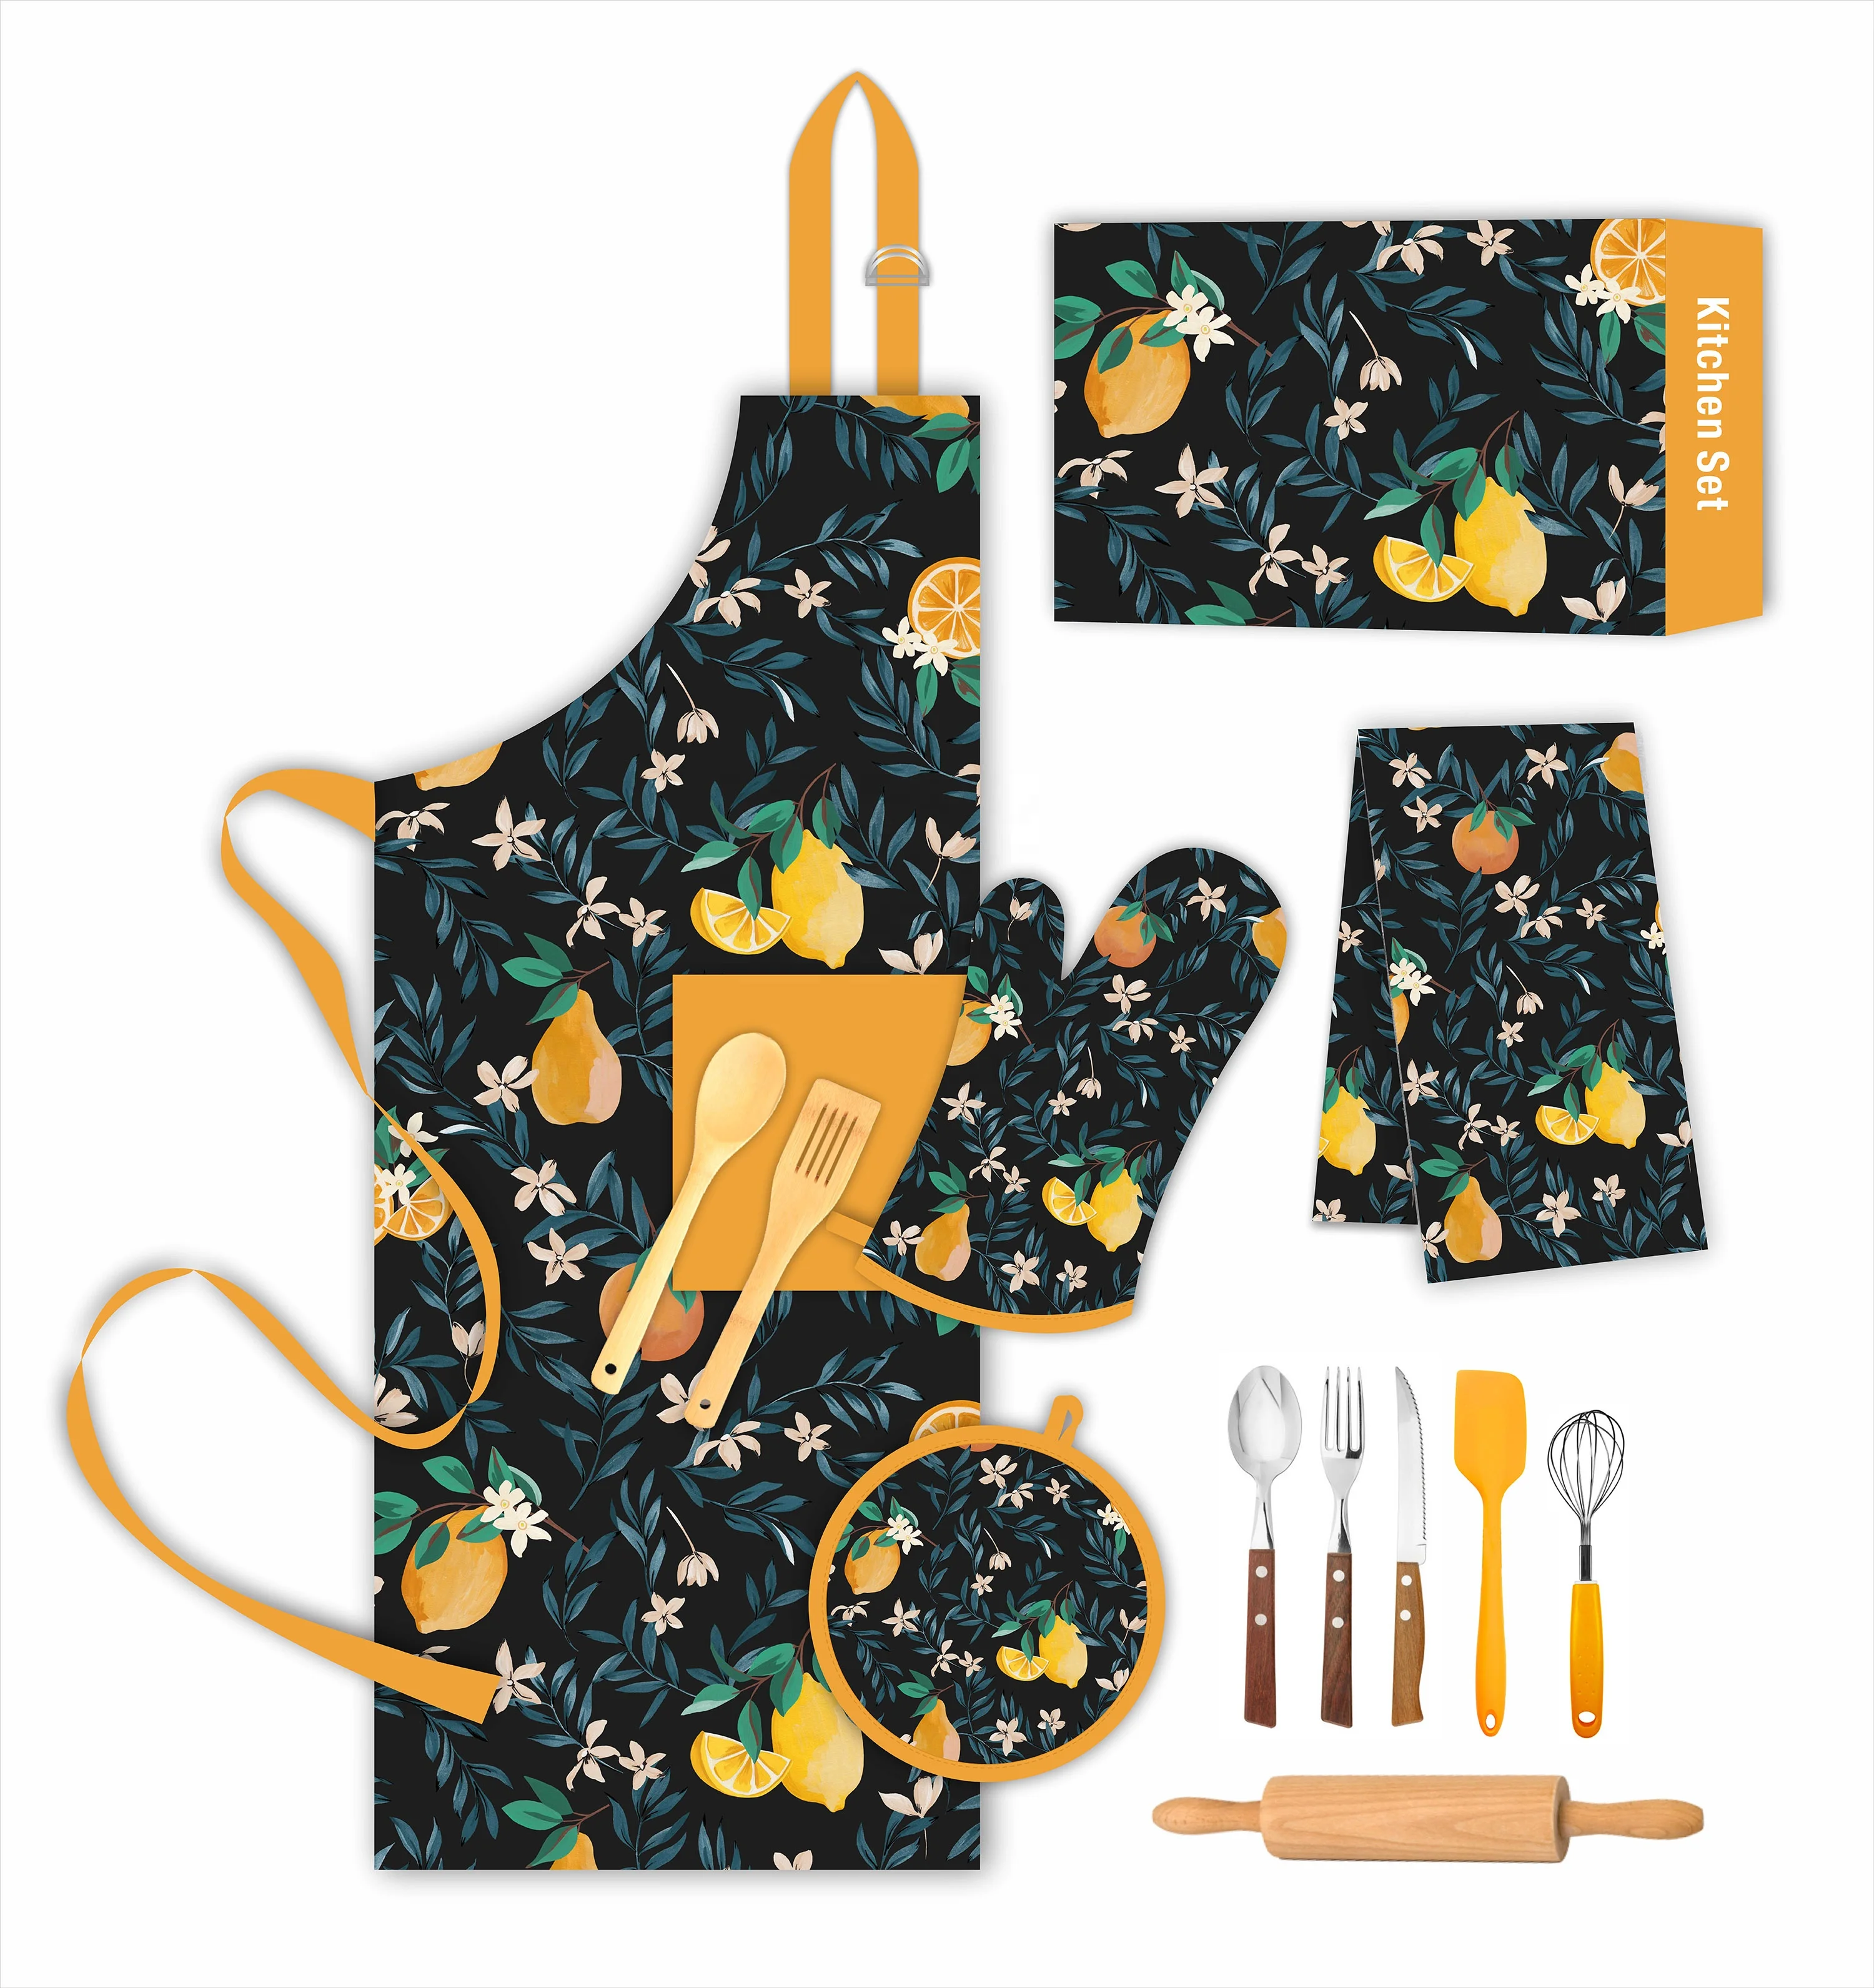 BBQ accessories set aprons for grilling custom logo kitchen apron kit kitchen chef cooking bib yarn dyed grill apron with tools